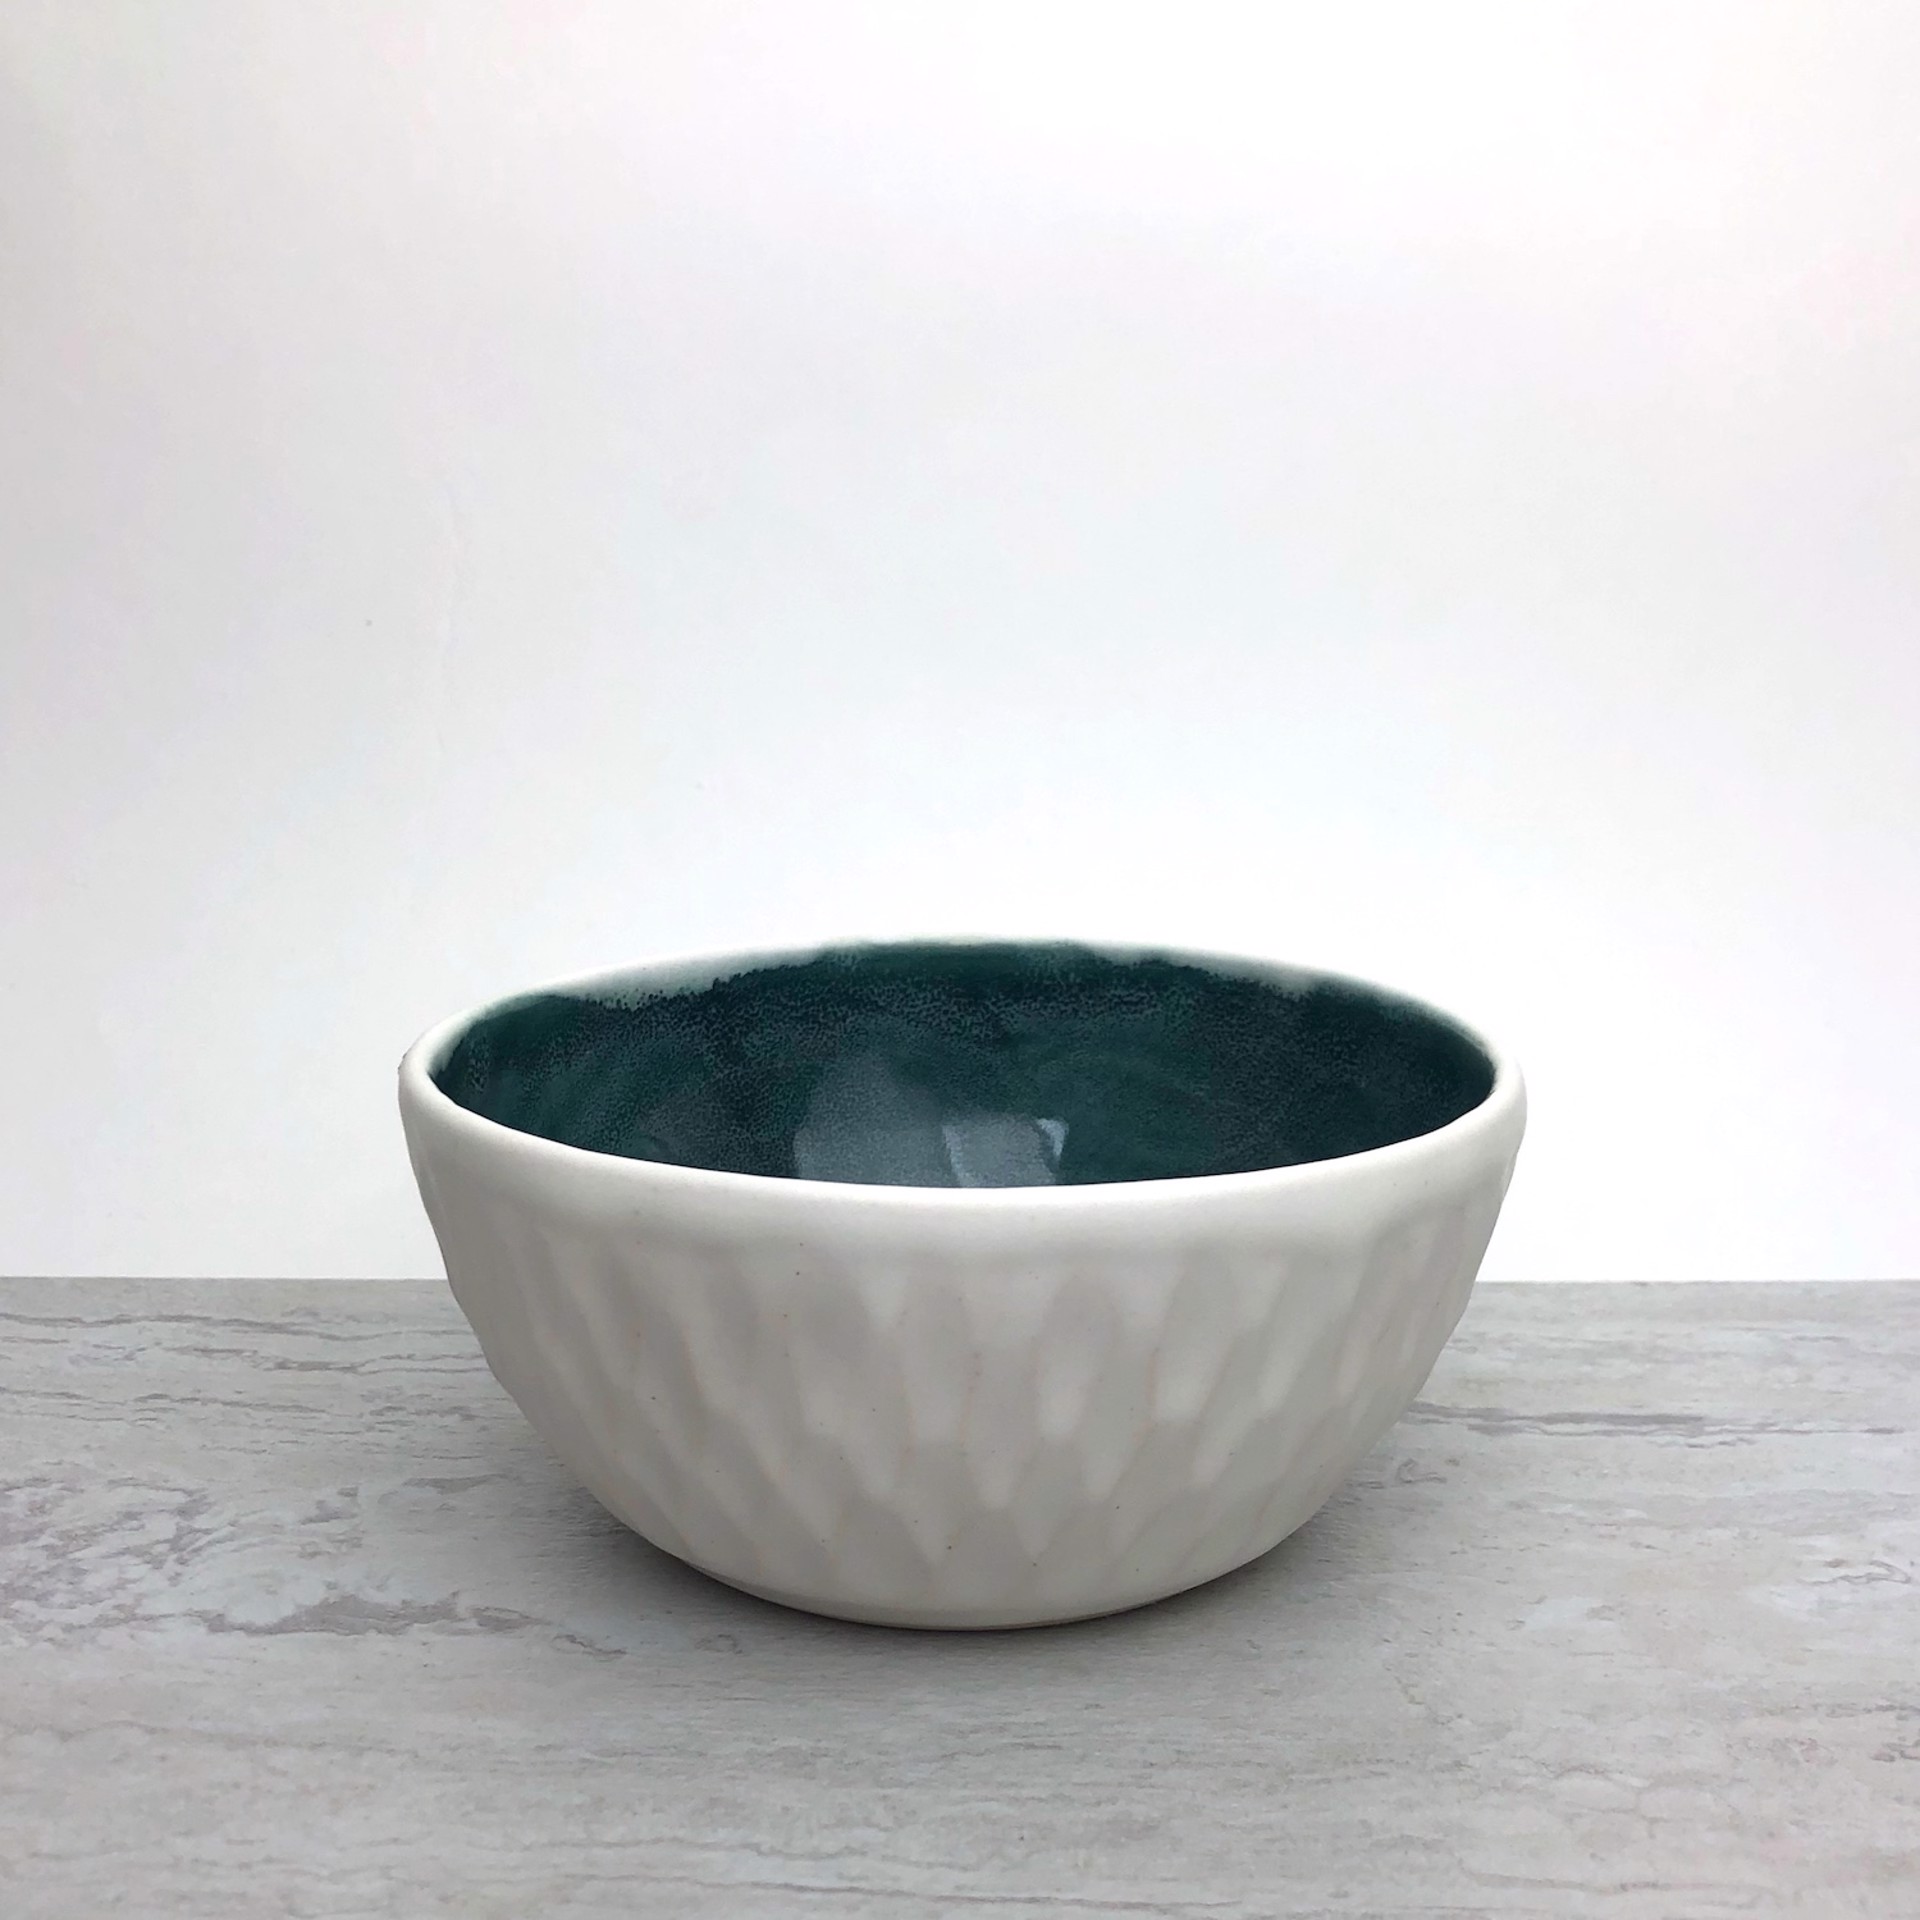 #41 ogunquit small serving bowl by Leah Streetman